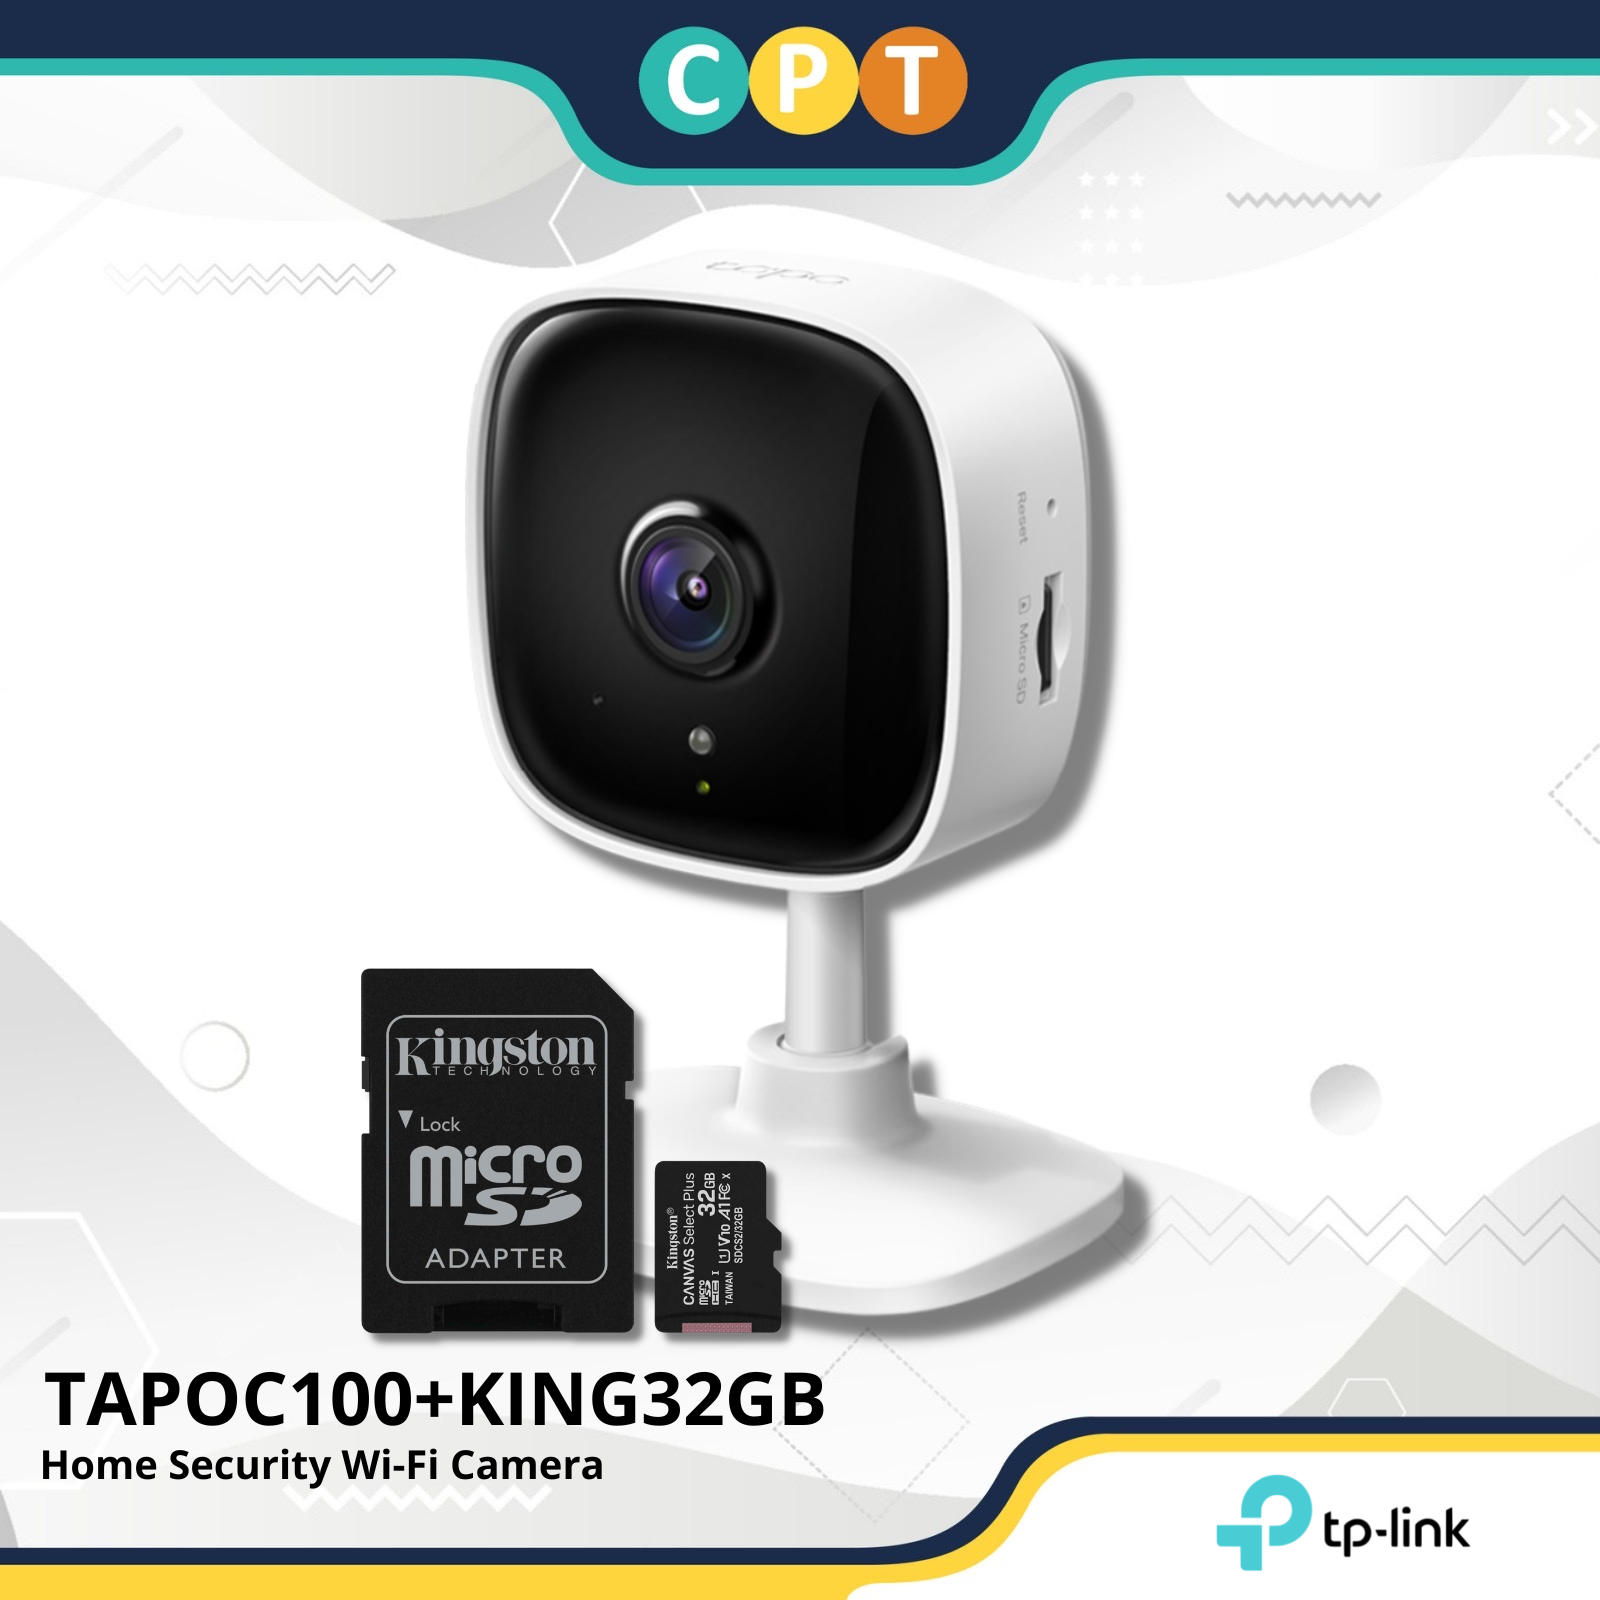 Tp Link Tapo C100 Home Security Wi-Fi Camera 